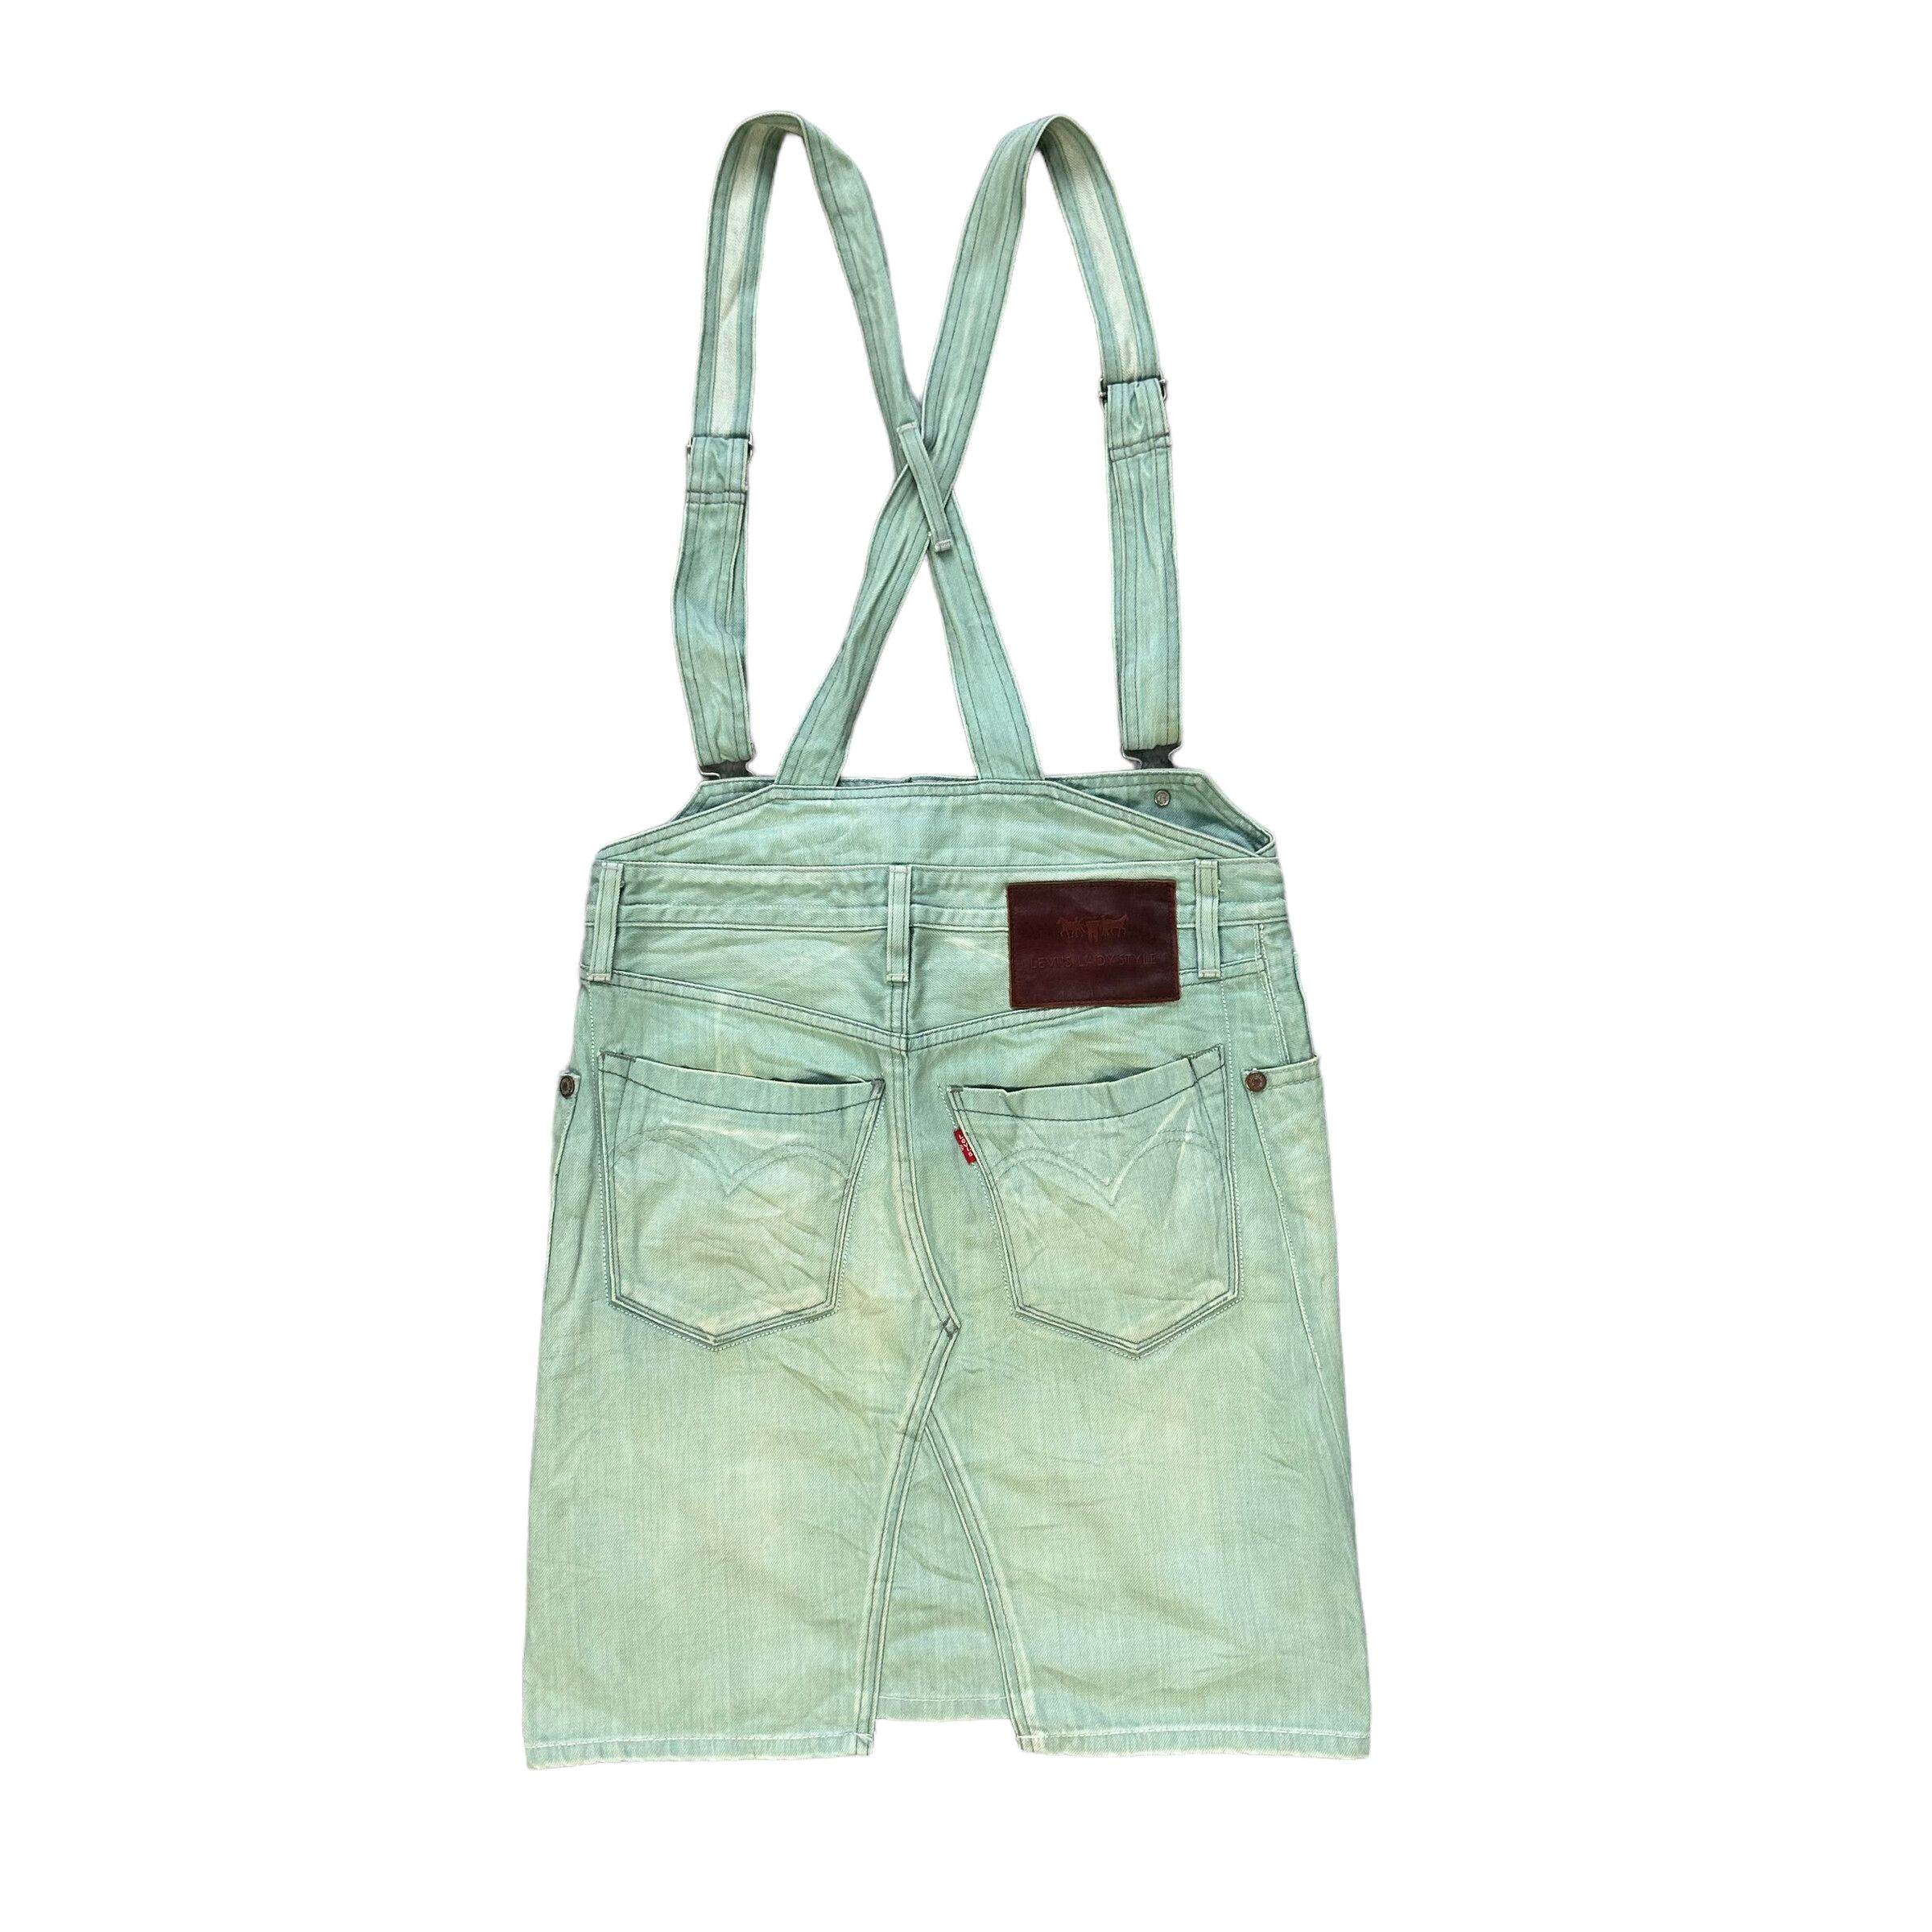 LEVIS LADY STYLE OVERALL MINI SKIRT IN GREEN DENIM #8659-019 - 11